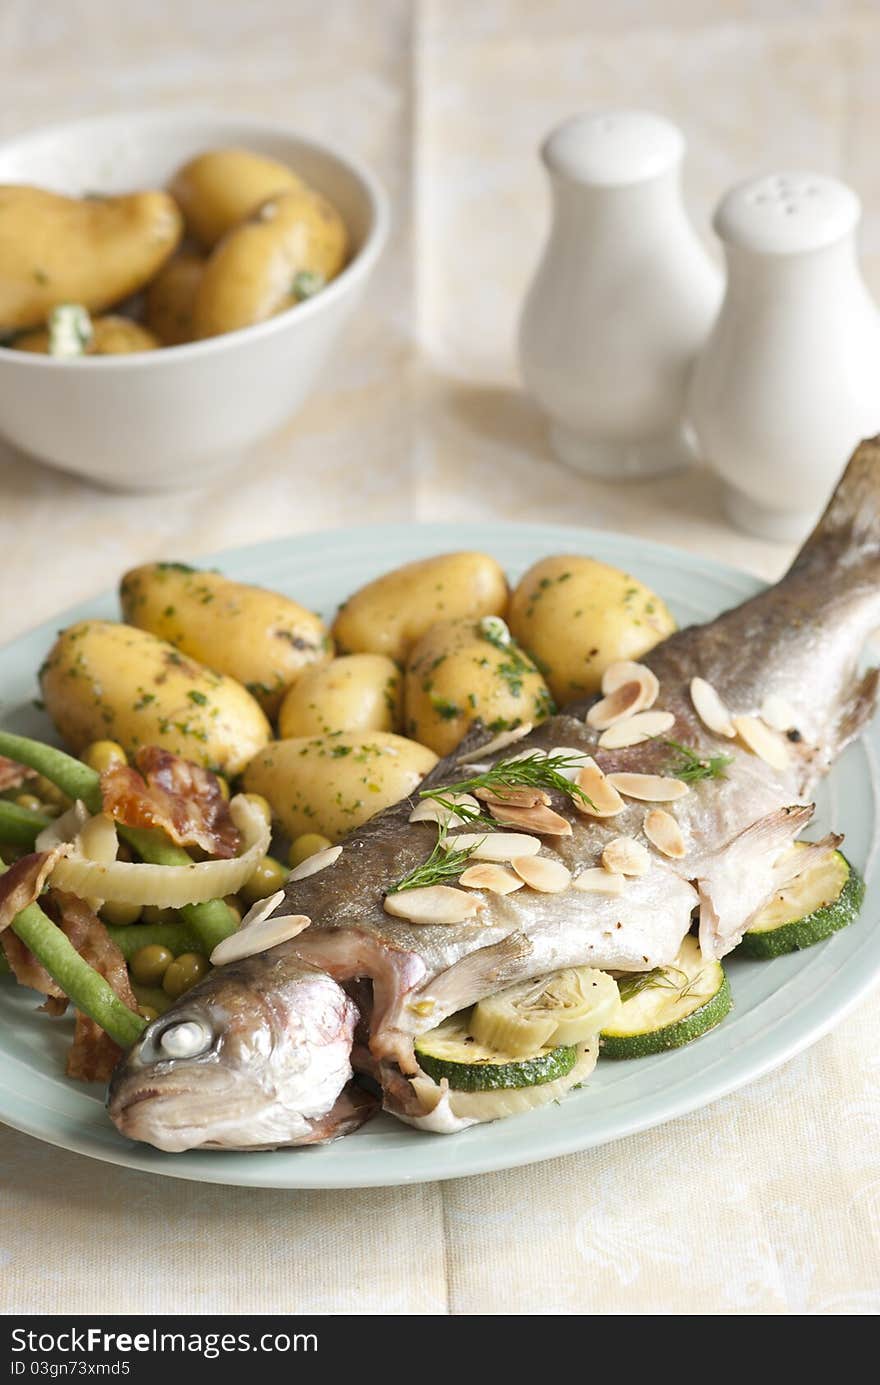 Oven-baked trout stuffed with fennel and courgettes